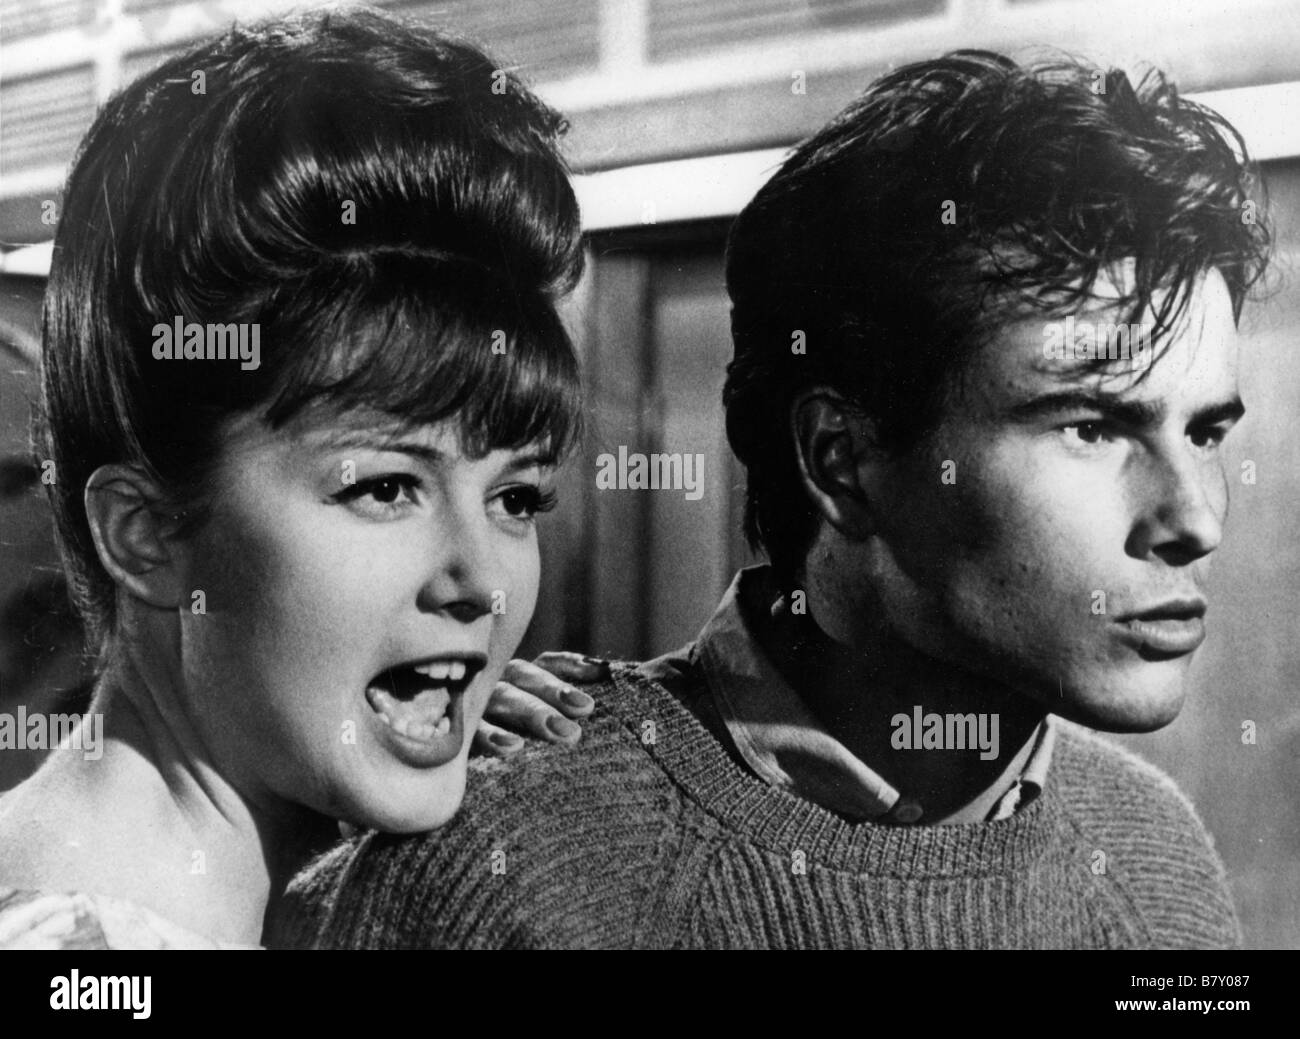 1960s woman Black and White Stock Photos & Images - Alamy